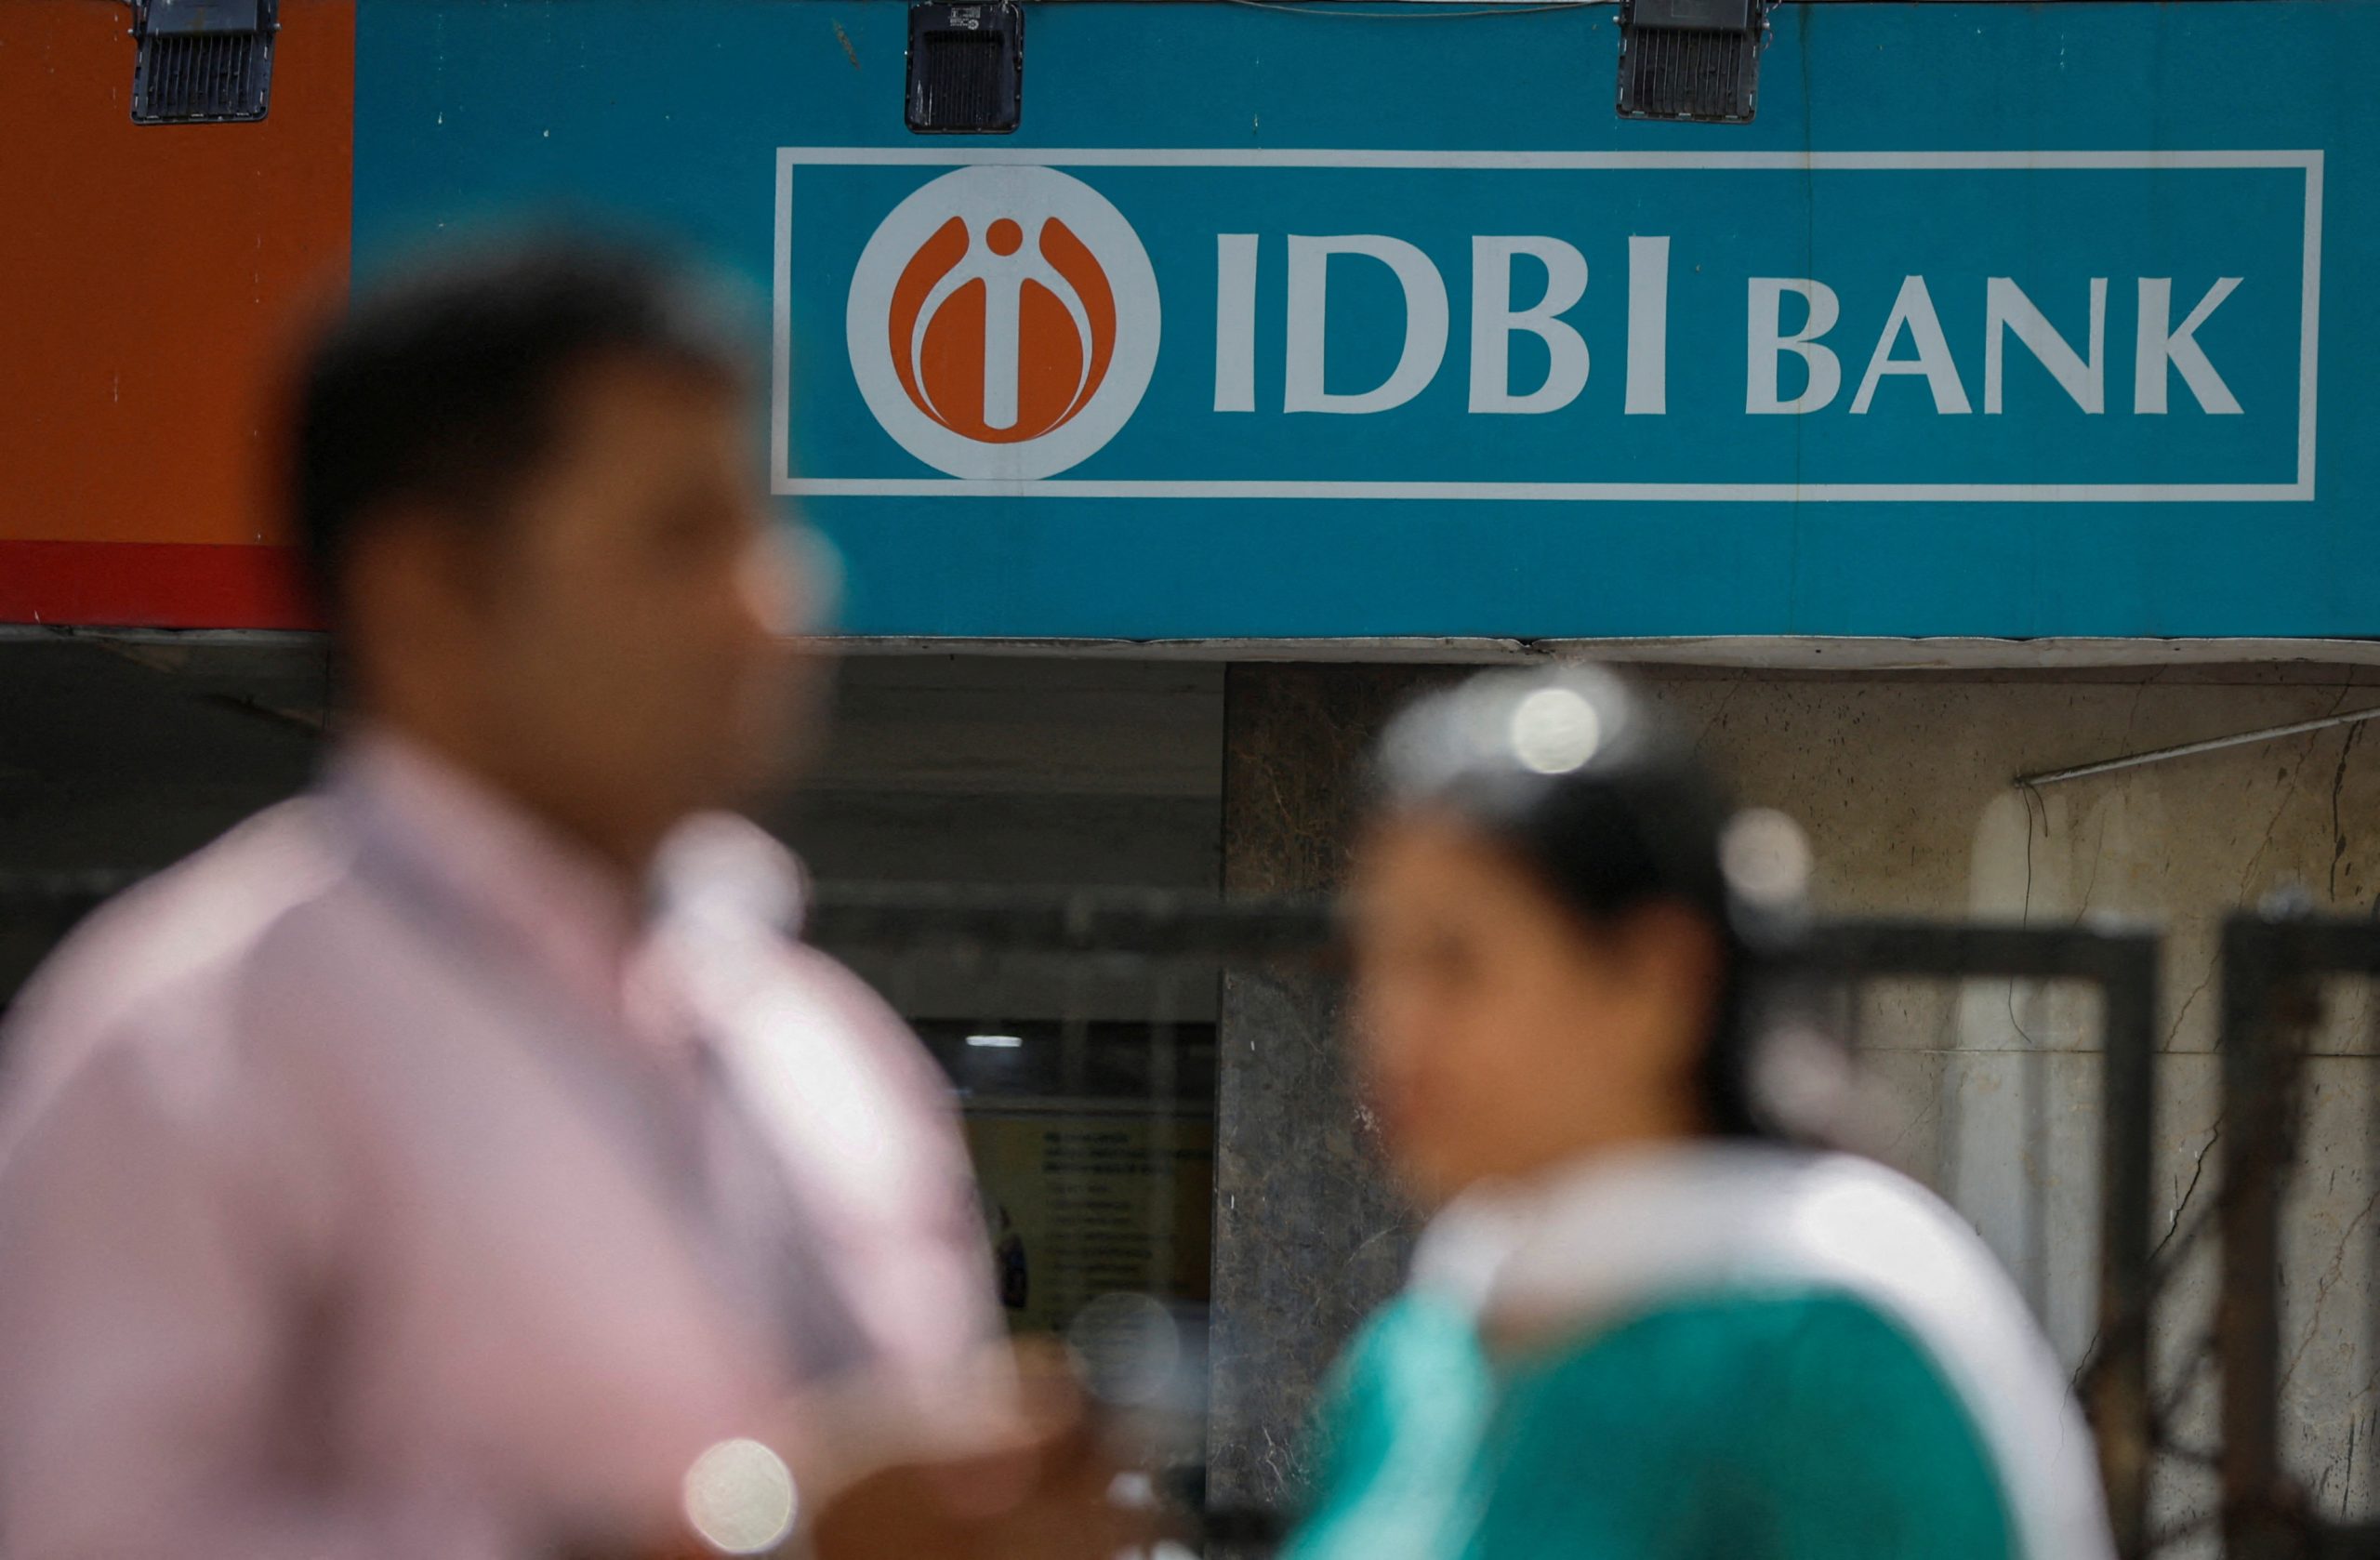 People walk past a branch of IDBI Bank in New Delhi (Image/Reuters)